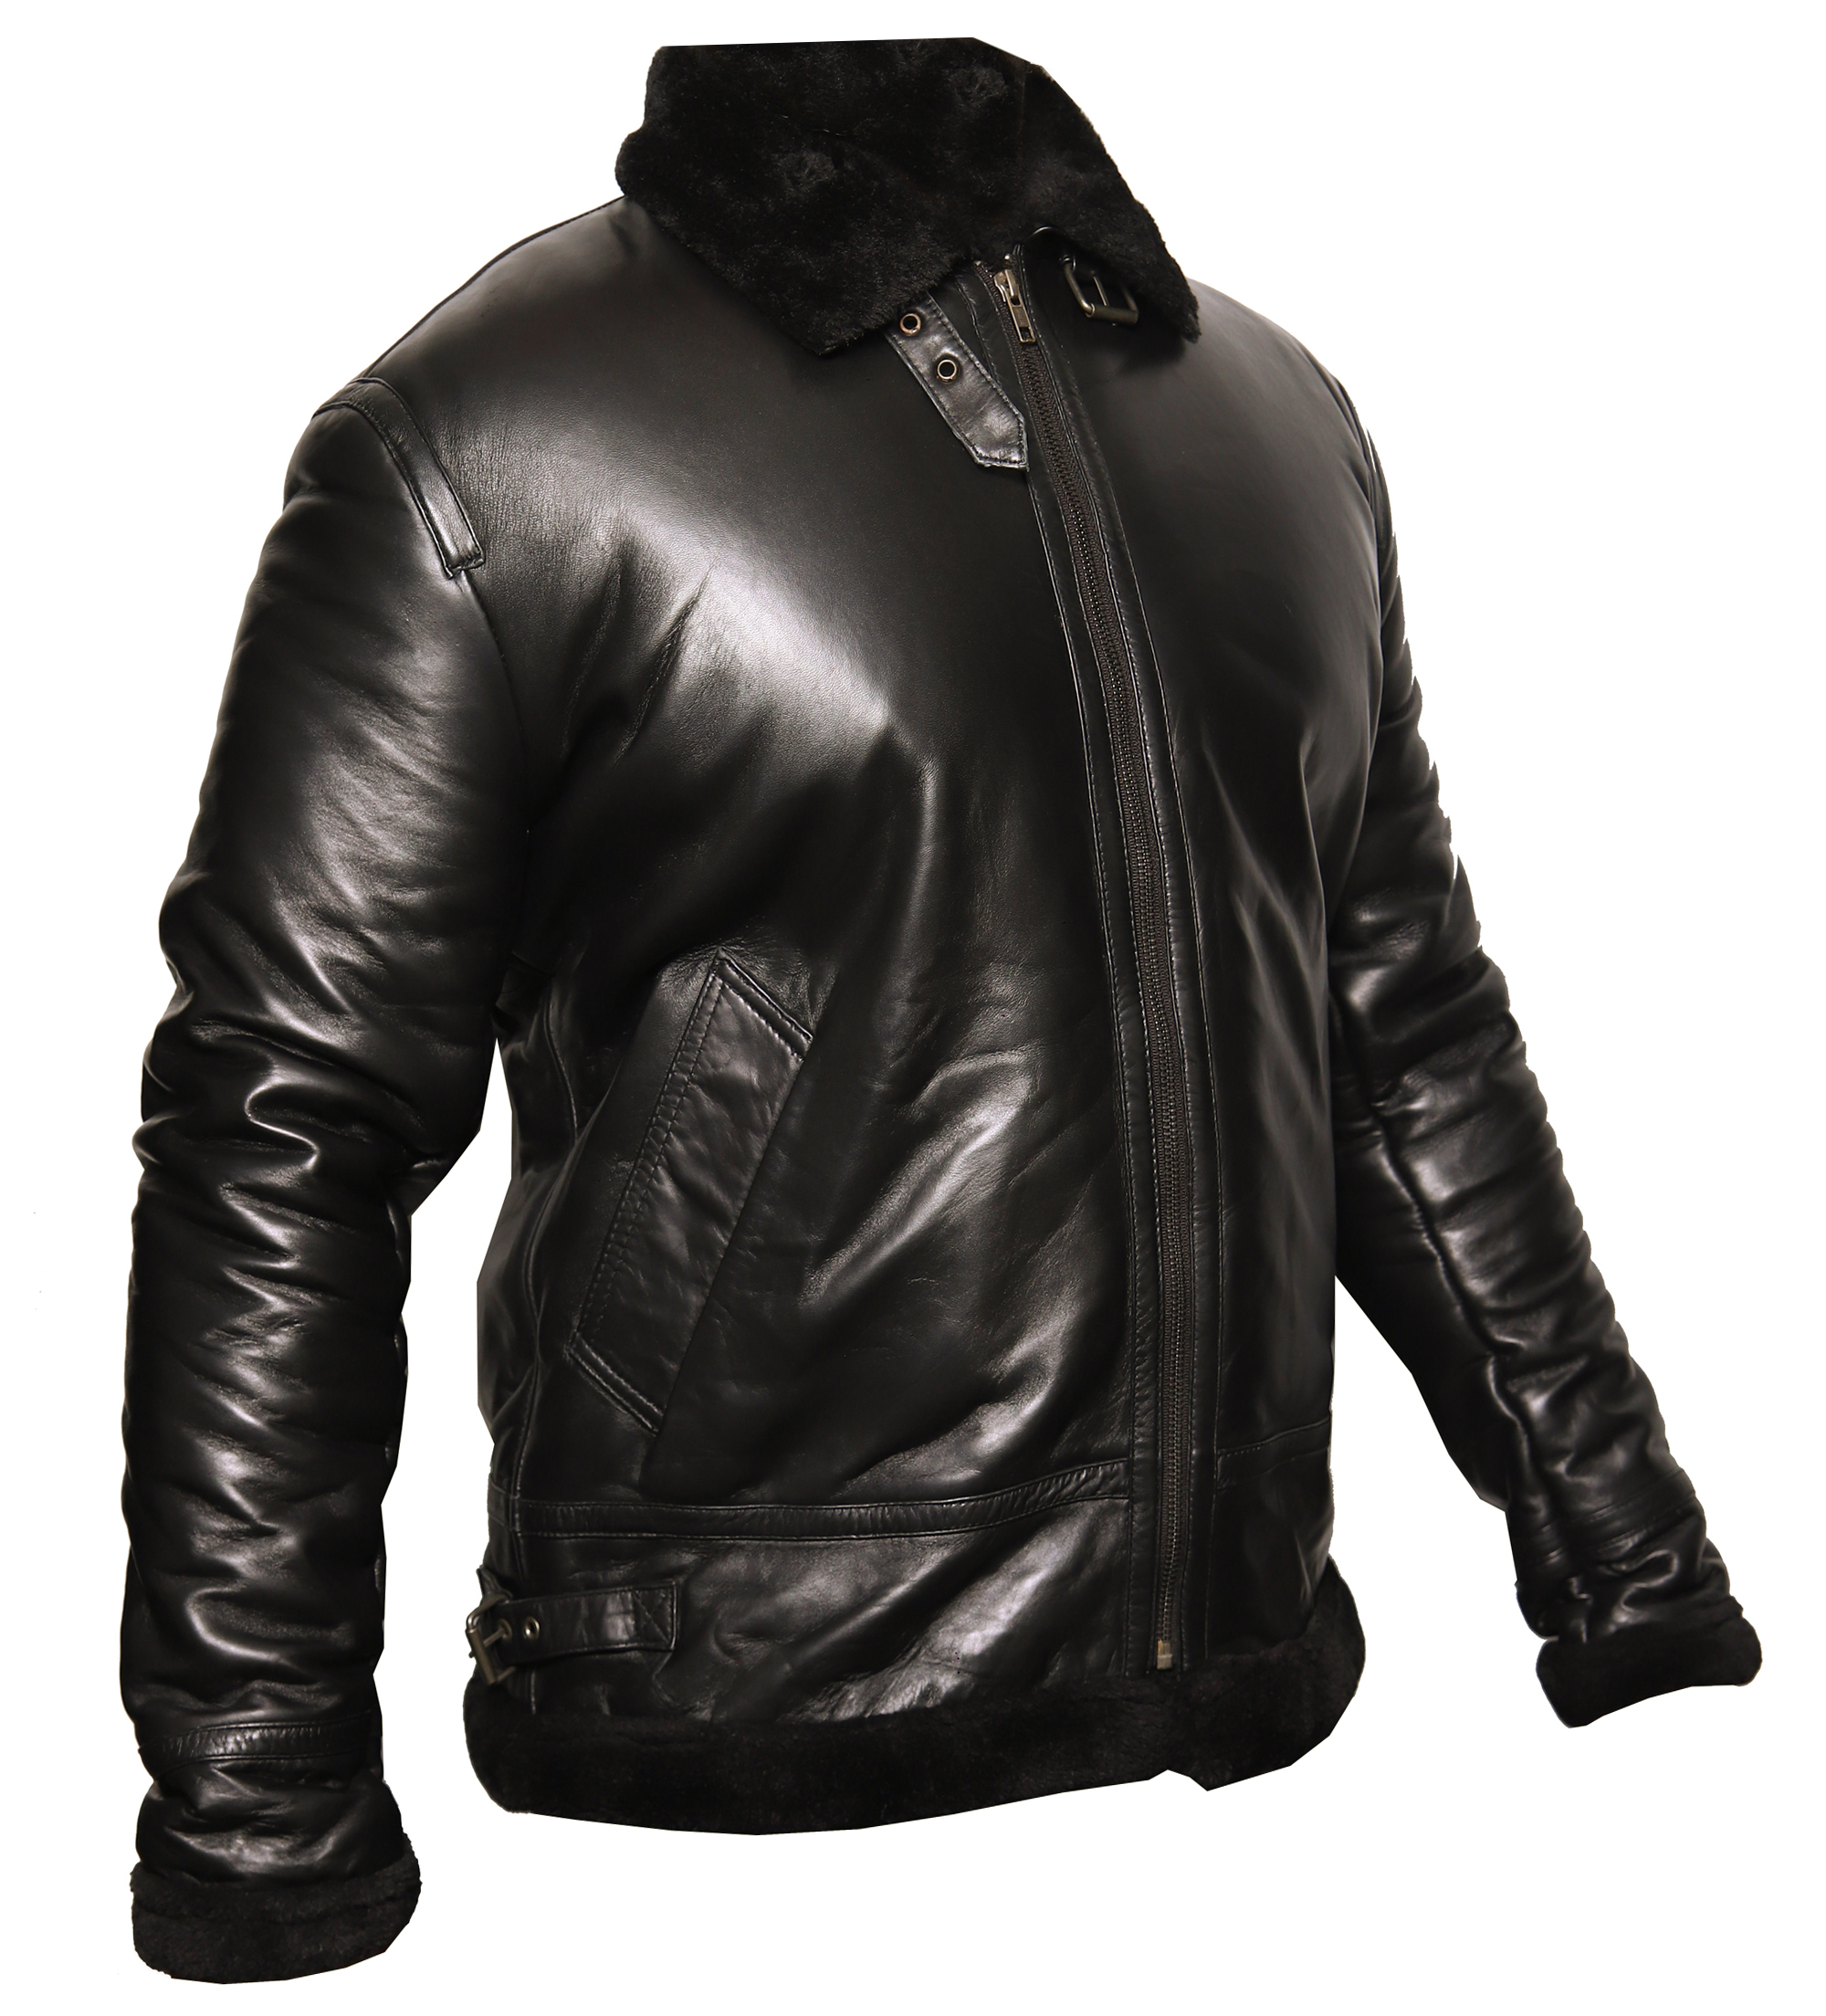 VALUABLE SHOPPING SOLUTION – BUY LEATHER JACKETS ONLINE